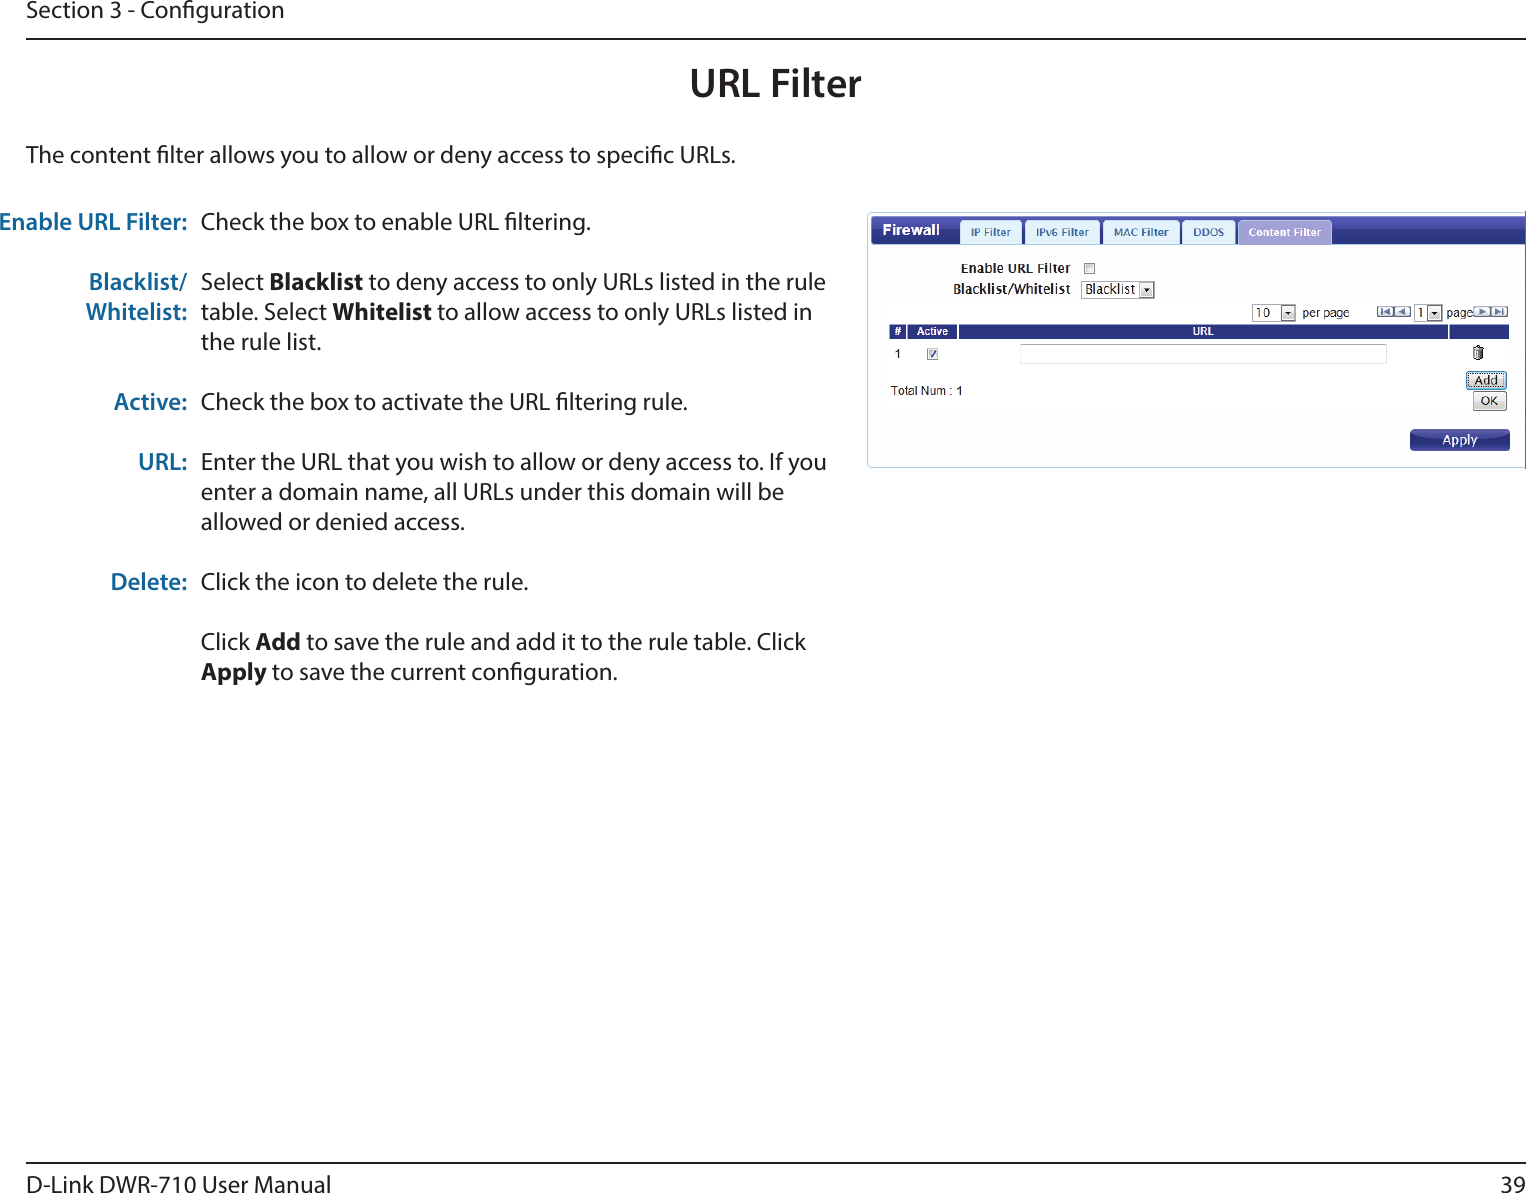 39D-Link DWR-710 User ManualSection 3 - CongurationURL FilterCheck the box to enable URL ltering.Select Blacklist to deny access to only URLs listed in the rule table. Select Whitelist to allow access to only URLs listed in the rule list. Check the box to activate the URL ltering rule. Enter the URL that you wish to allow or deny access to. If you enter a domain name, all URLs under this domain will be allowed or denied access.Click the icon to delete the rule. Click Add to save the rule and add it to the rule table. Click Apply to save the current conguration. Enable URL Filter:Blacklist/Whitelist:Active:URL:Delete:The content lter allows you to allow or deny access to specic URLs.